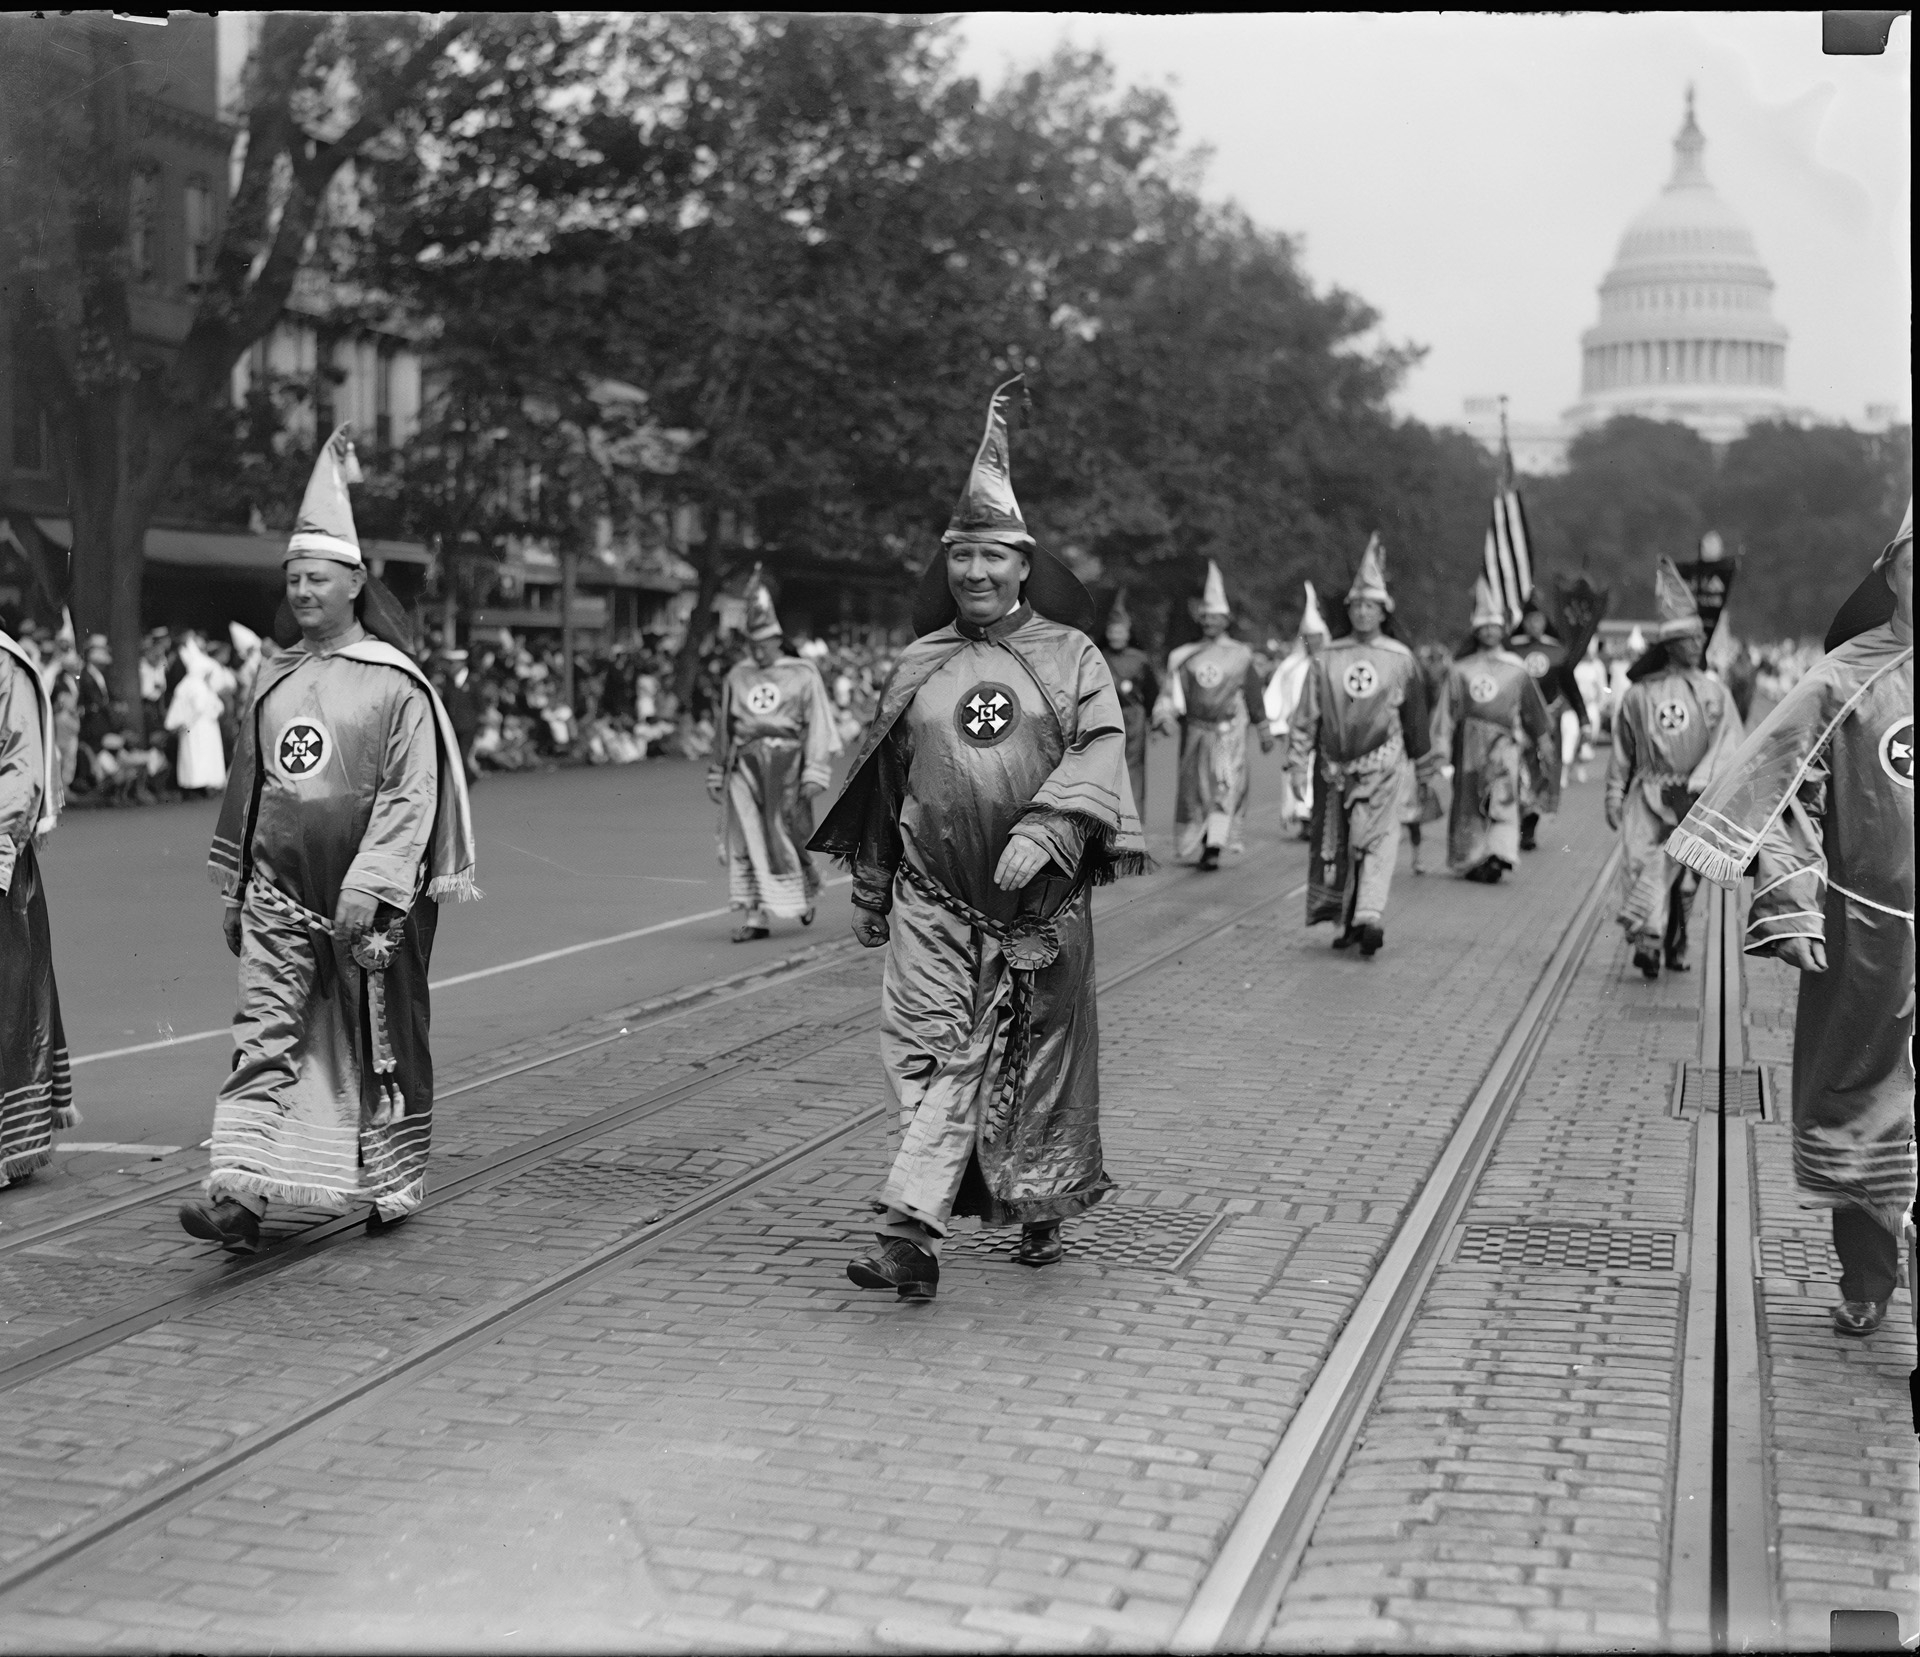 In 1925, thirty thousand members of the Ku Klux Klan marched in segregated Washington, DC. The next year hosted fifteen thousand marchers. Many marchers revealed their face with no fear of legal consequences for the group's terrorism and murder.